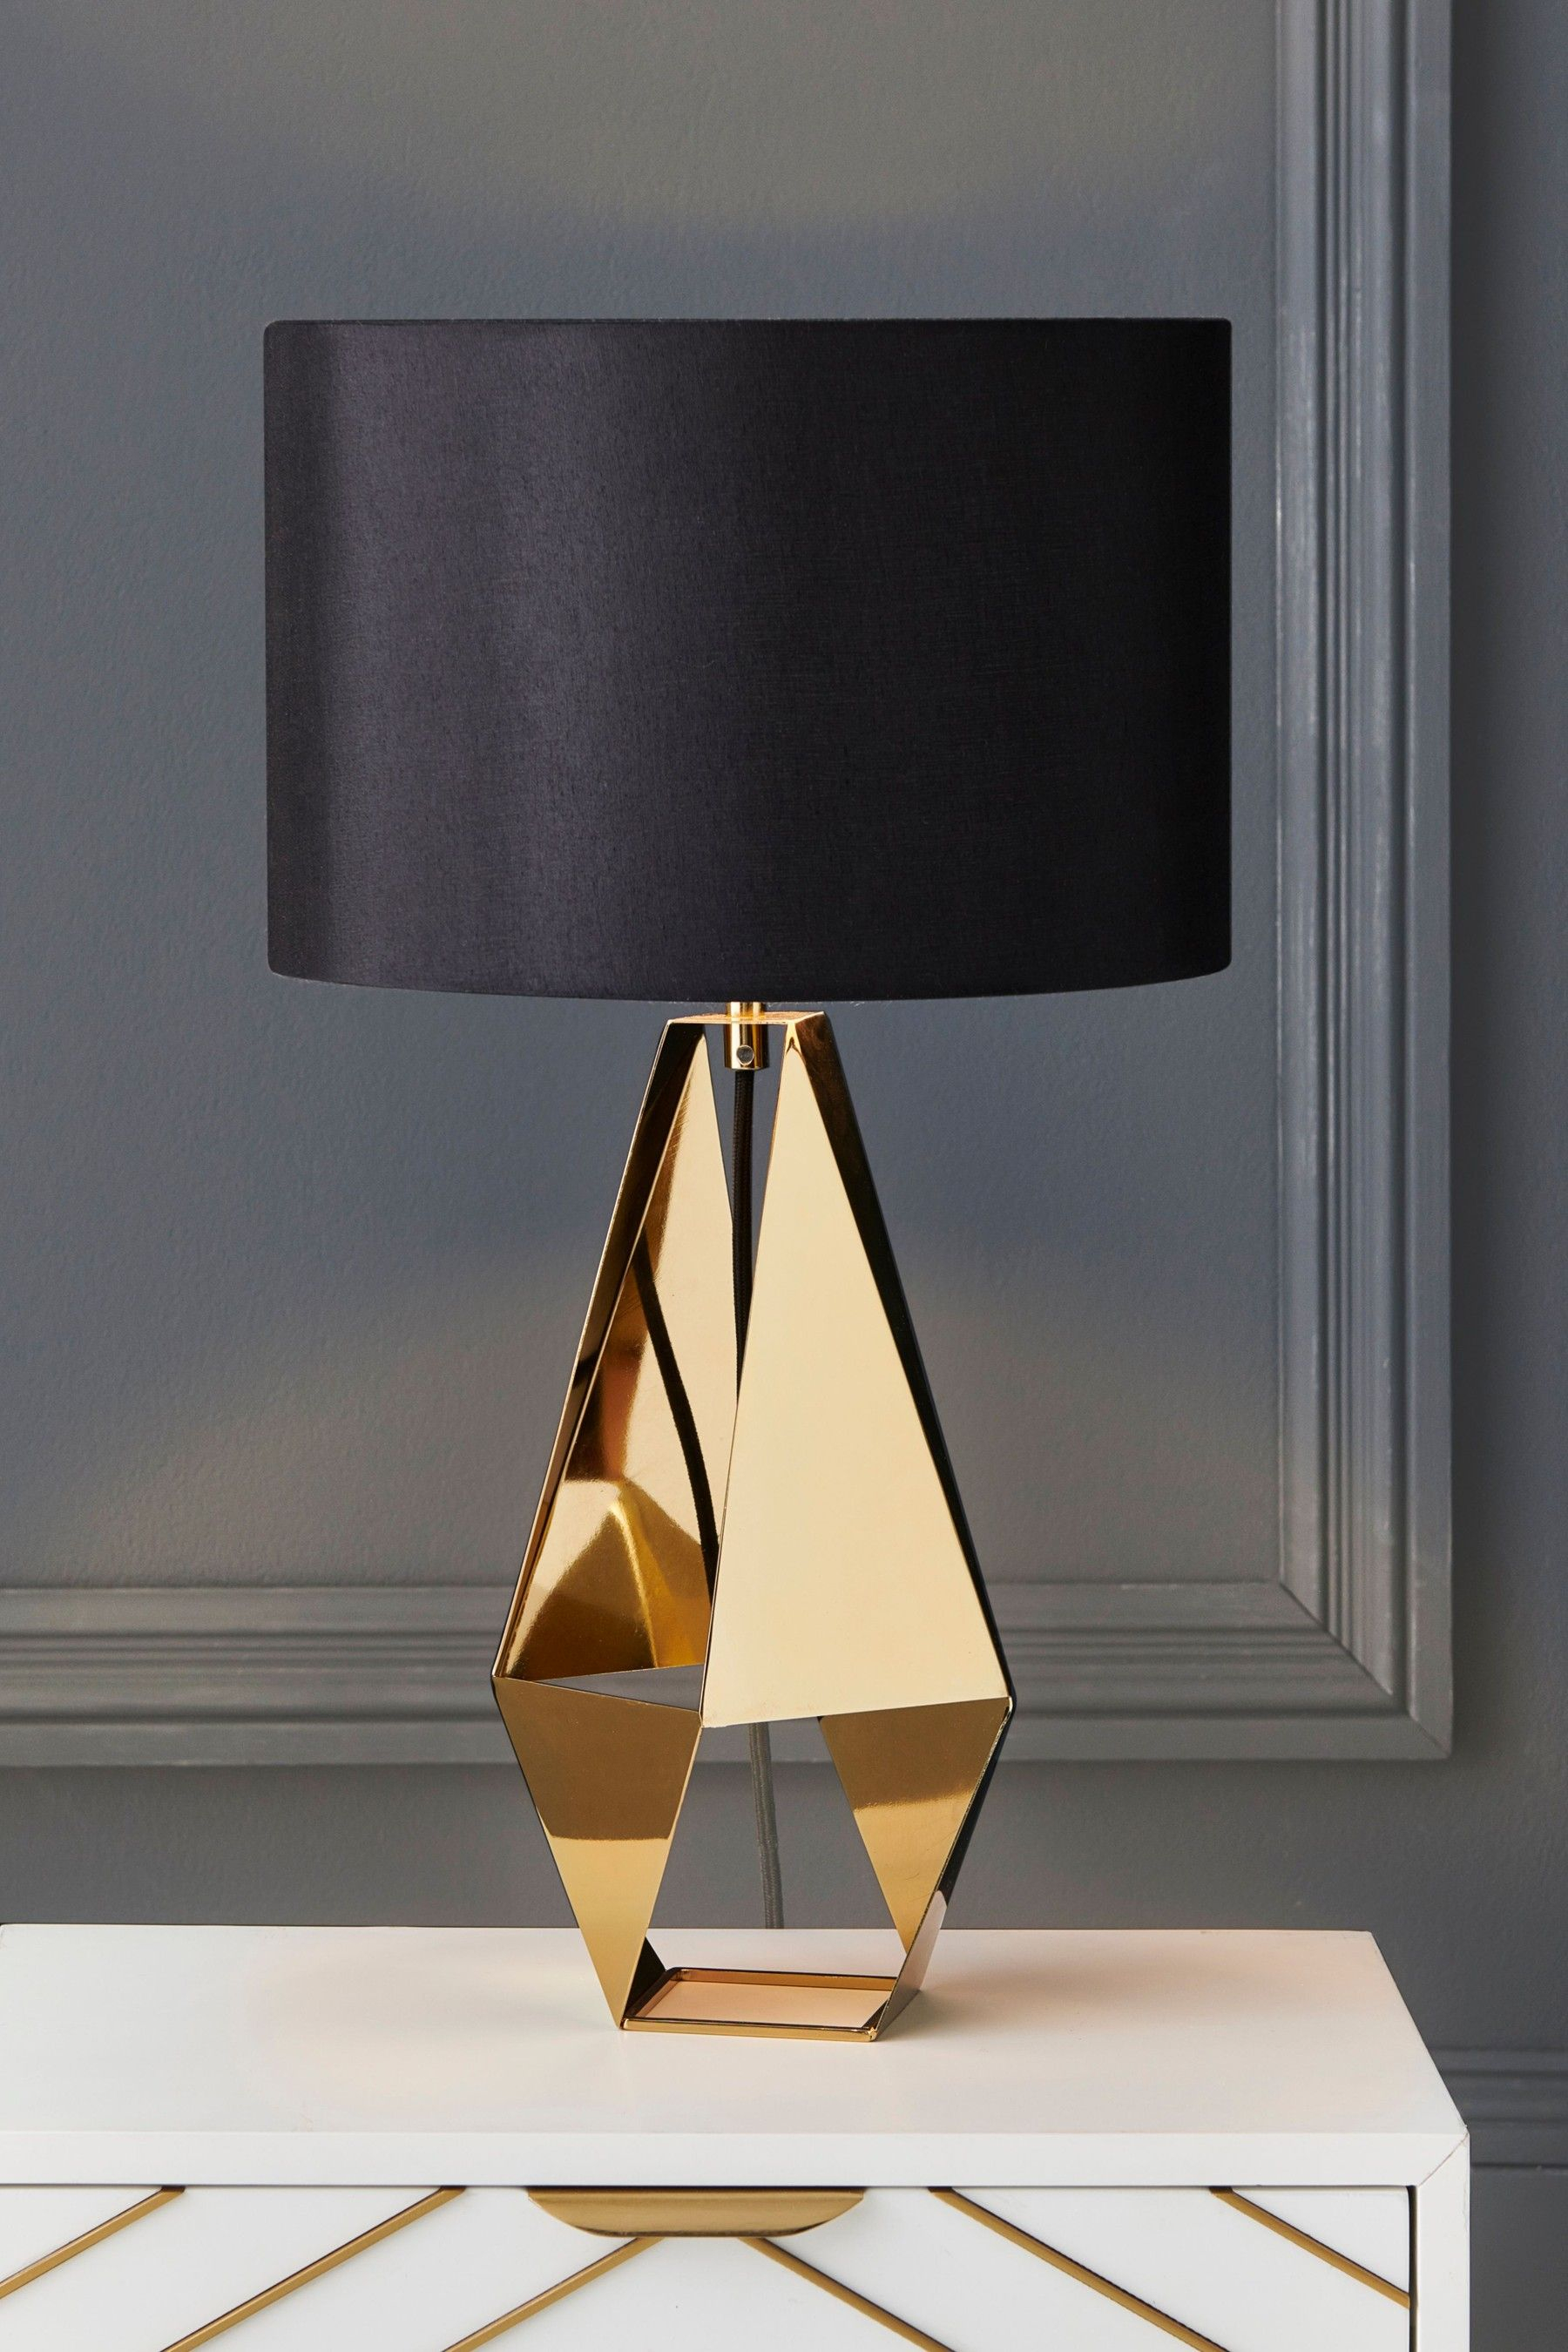 Next Harper Table Lamp Gold In 2019 Bedside Table Lamps regarding sizing 1800 X 2700